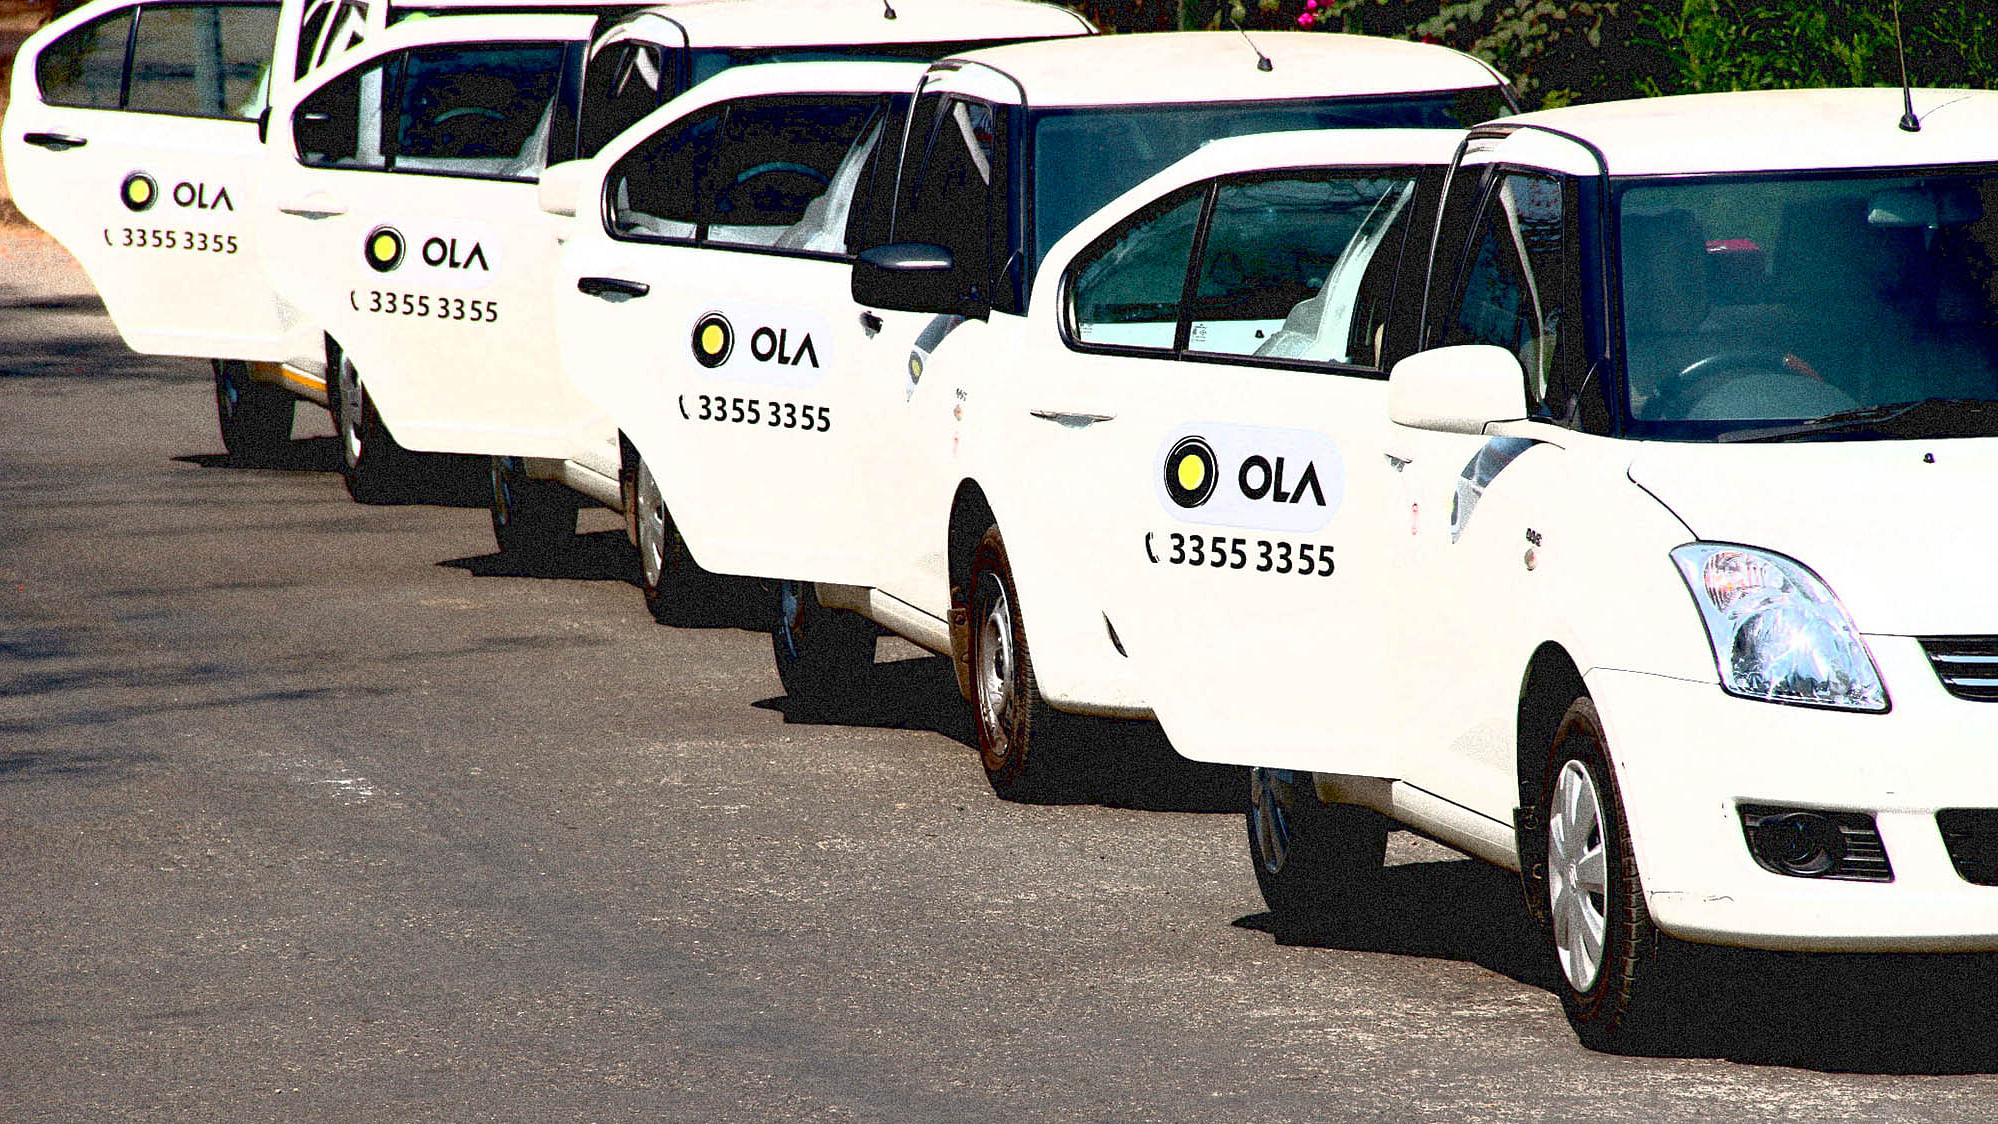 Ola launched its services in the UK earlier this year.&nbsp;